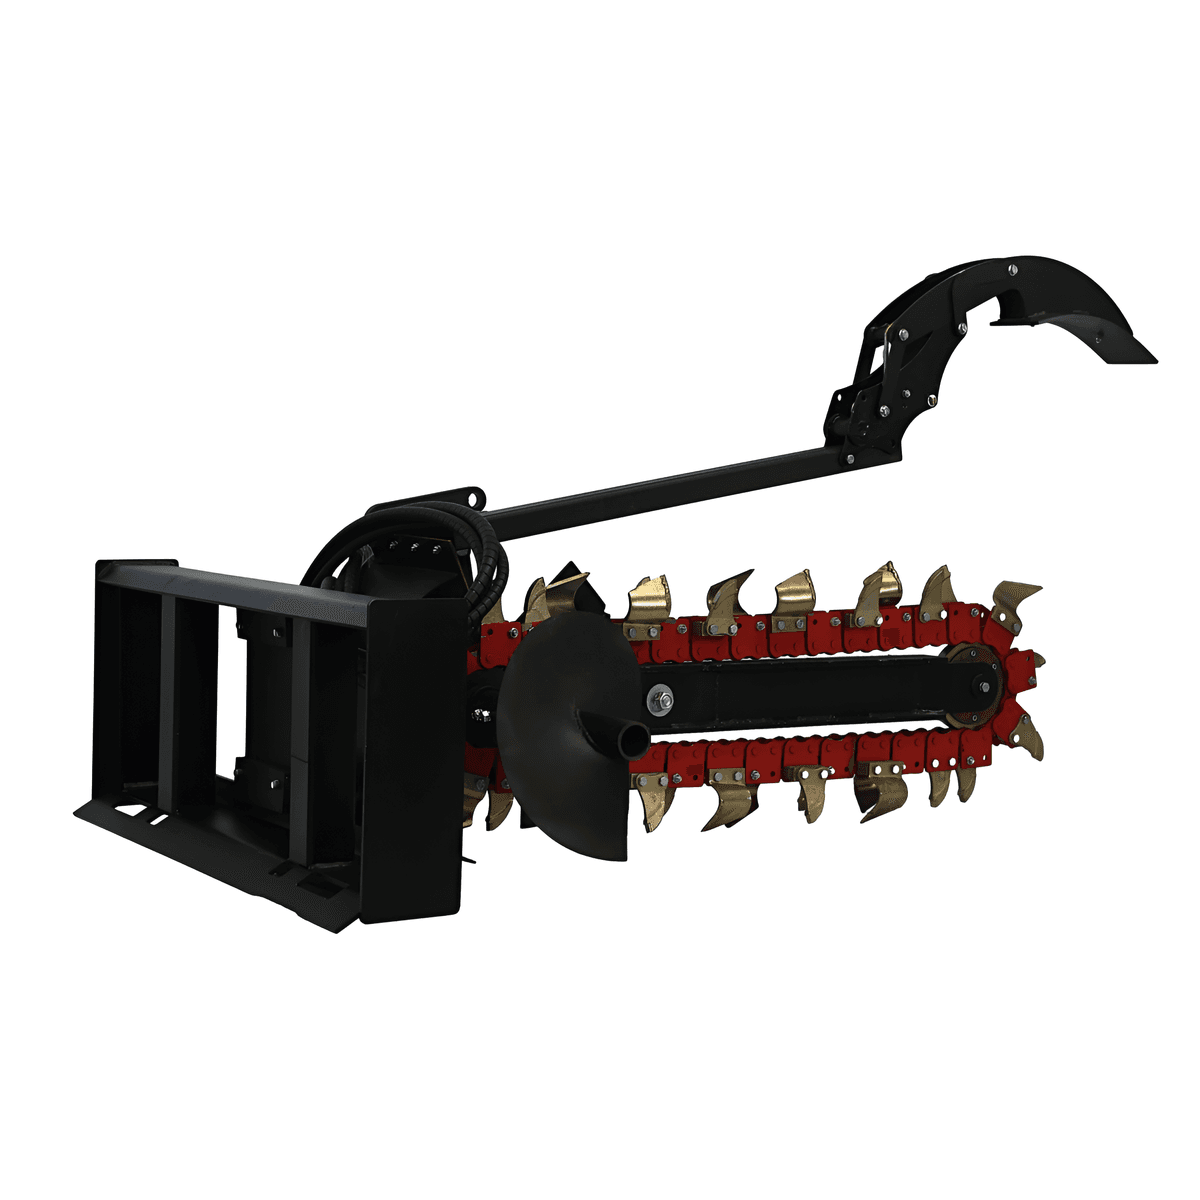 Value Industrial Skid Steer Trencher - 900mm trenching width - 200mm trenching depth